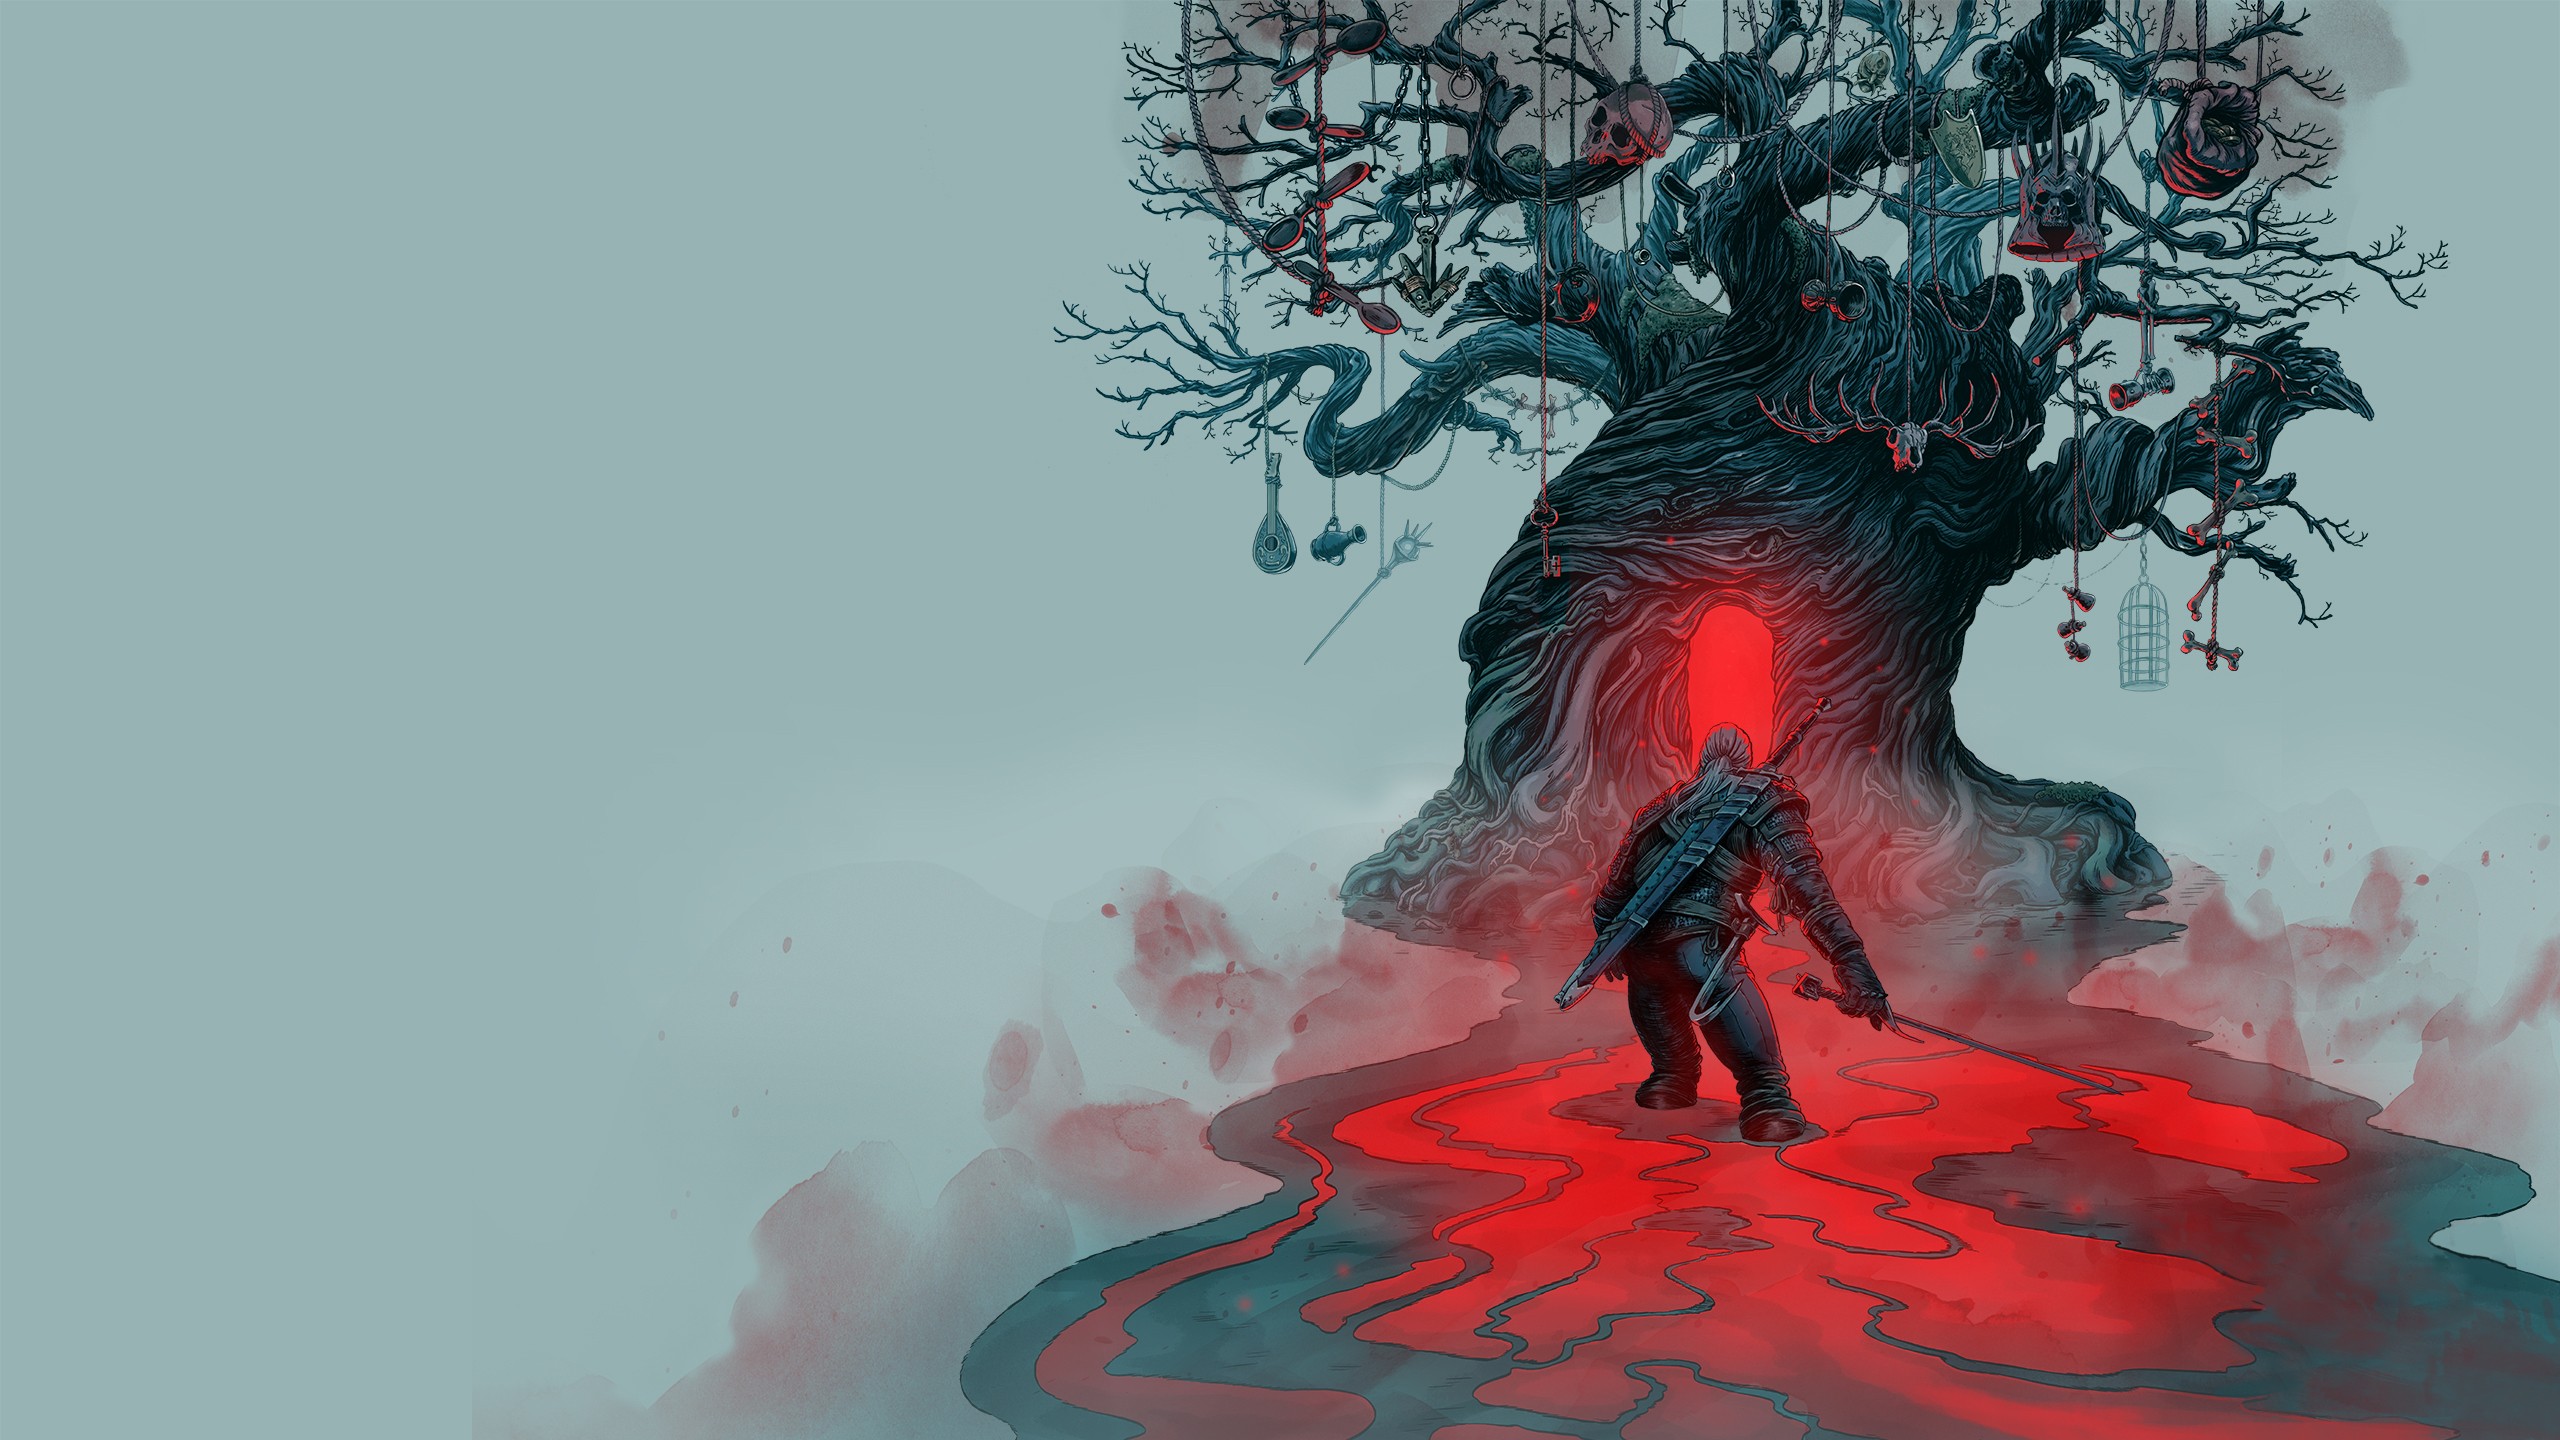 General 2560x1440 digital art video games The Witcher 3: Wild Hunt trees skull ropes sword Geralt of Rivia The Witcher spoon keys bones red video game art PC gaming fantasy art simple background